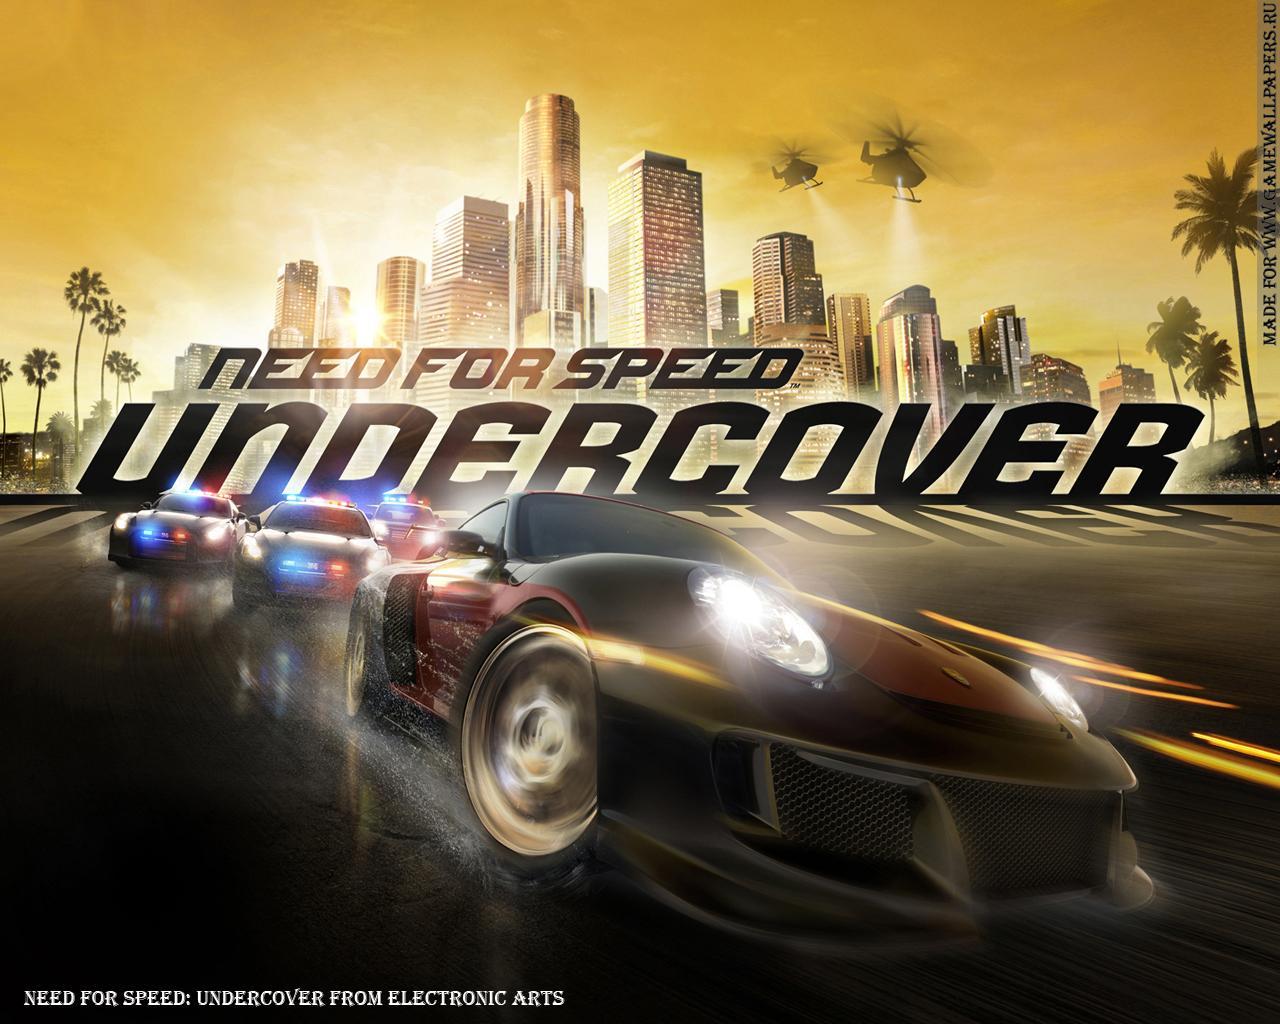 Need for Speed Undercover Wallpaper Wallpaper